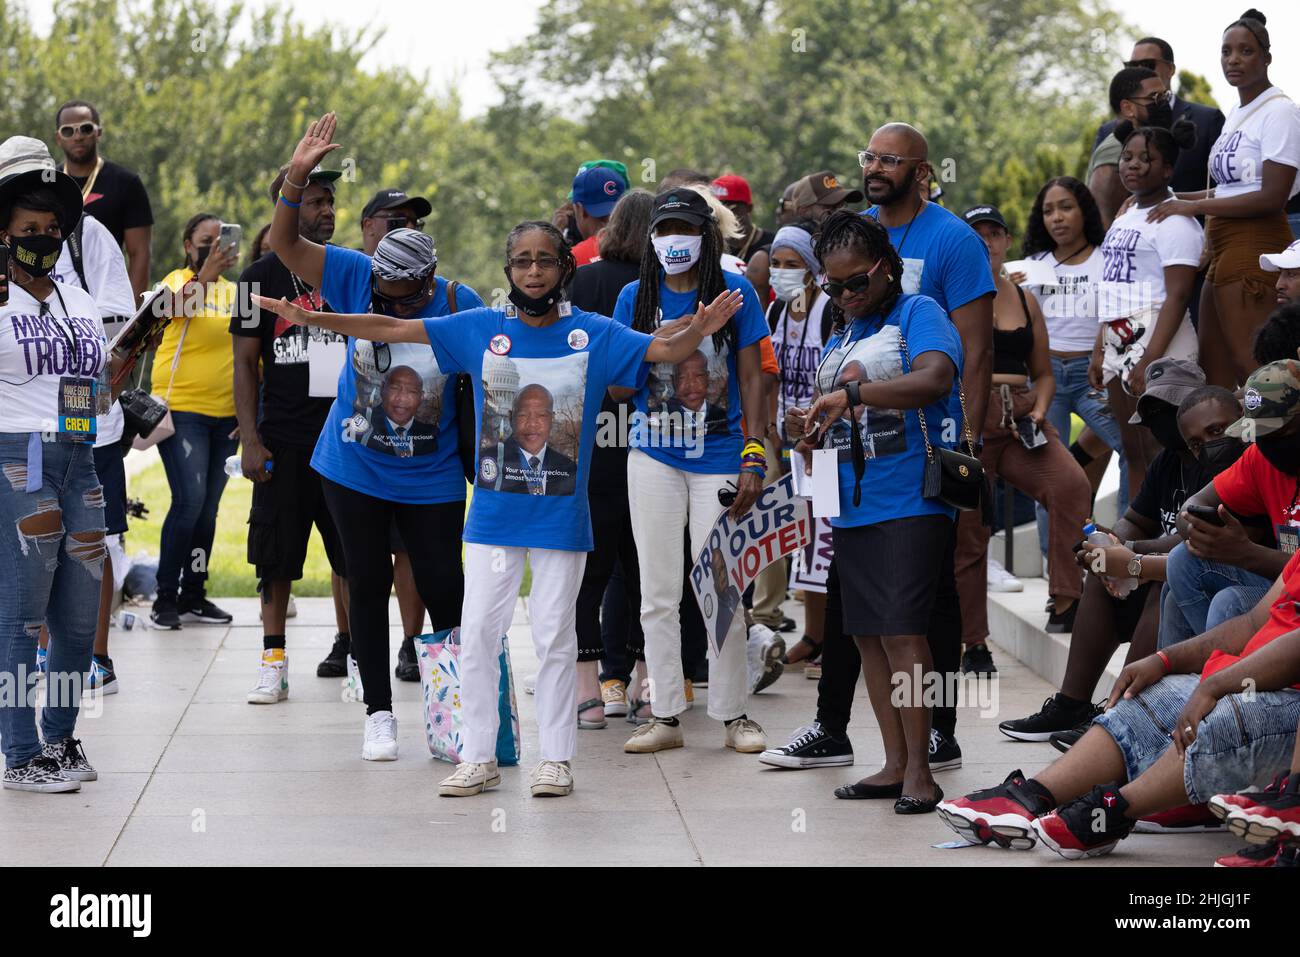 WASHINGTON, D.C. -- August 28, 2021: Demonstrators are seen during the Make Good Trouble Rally at the Lincoln Memorial. Stock Photo